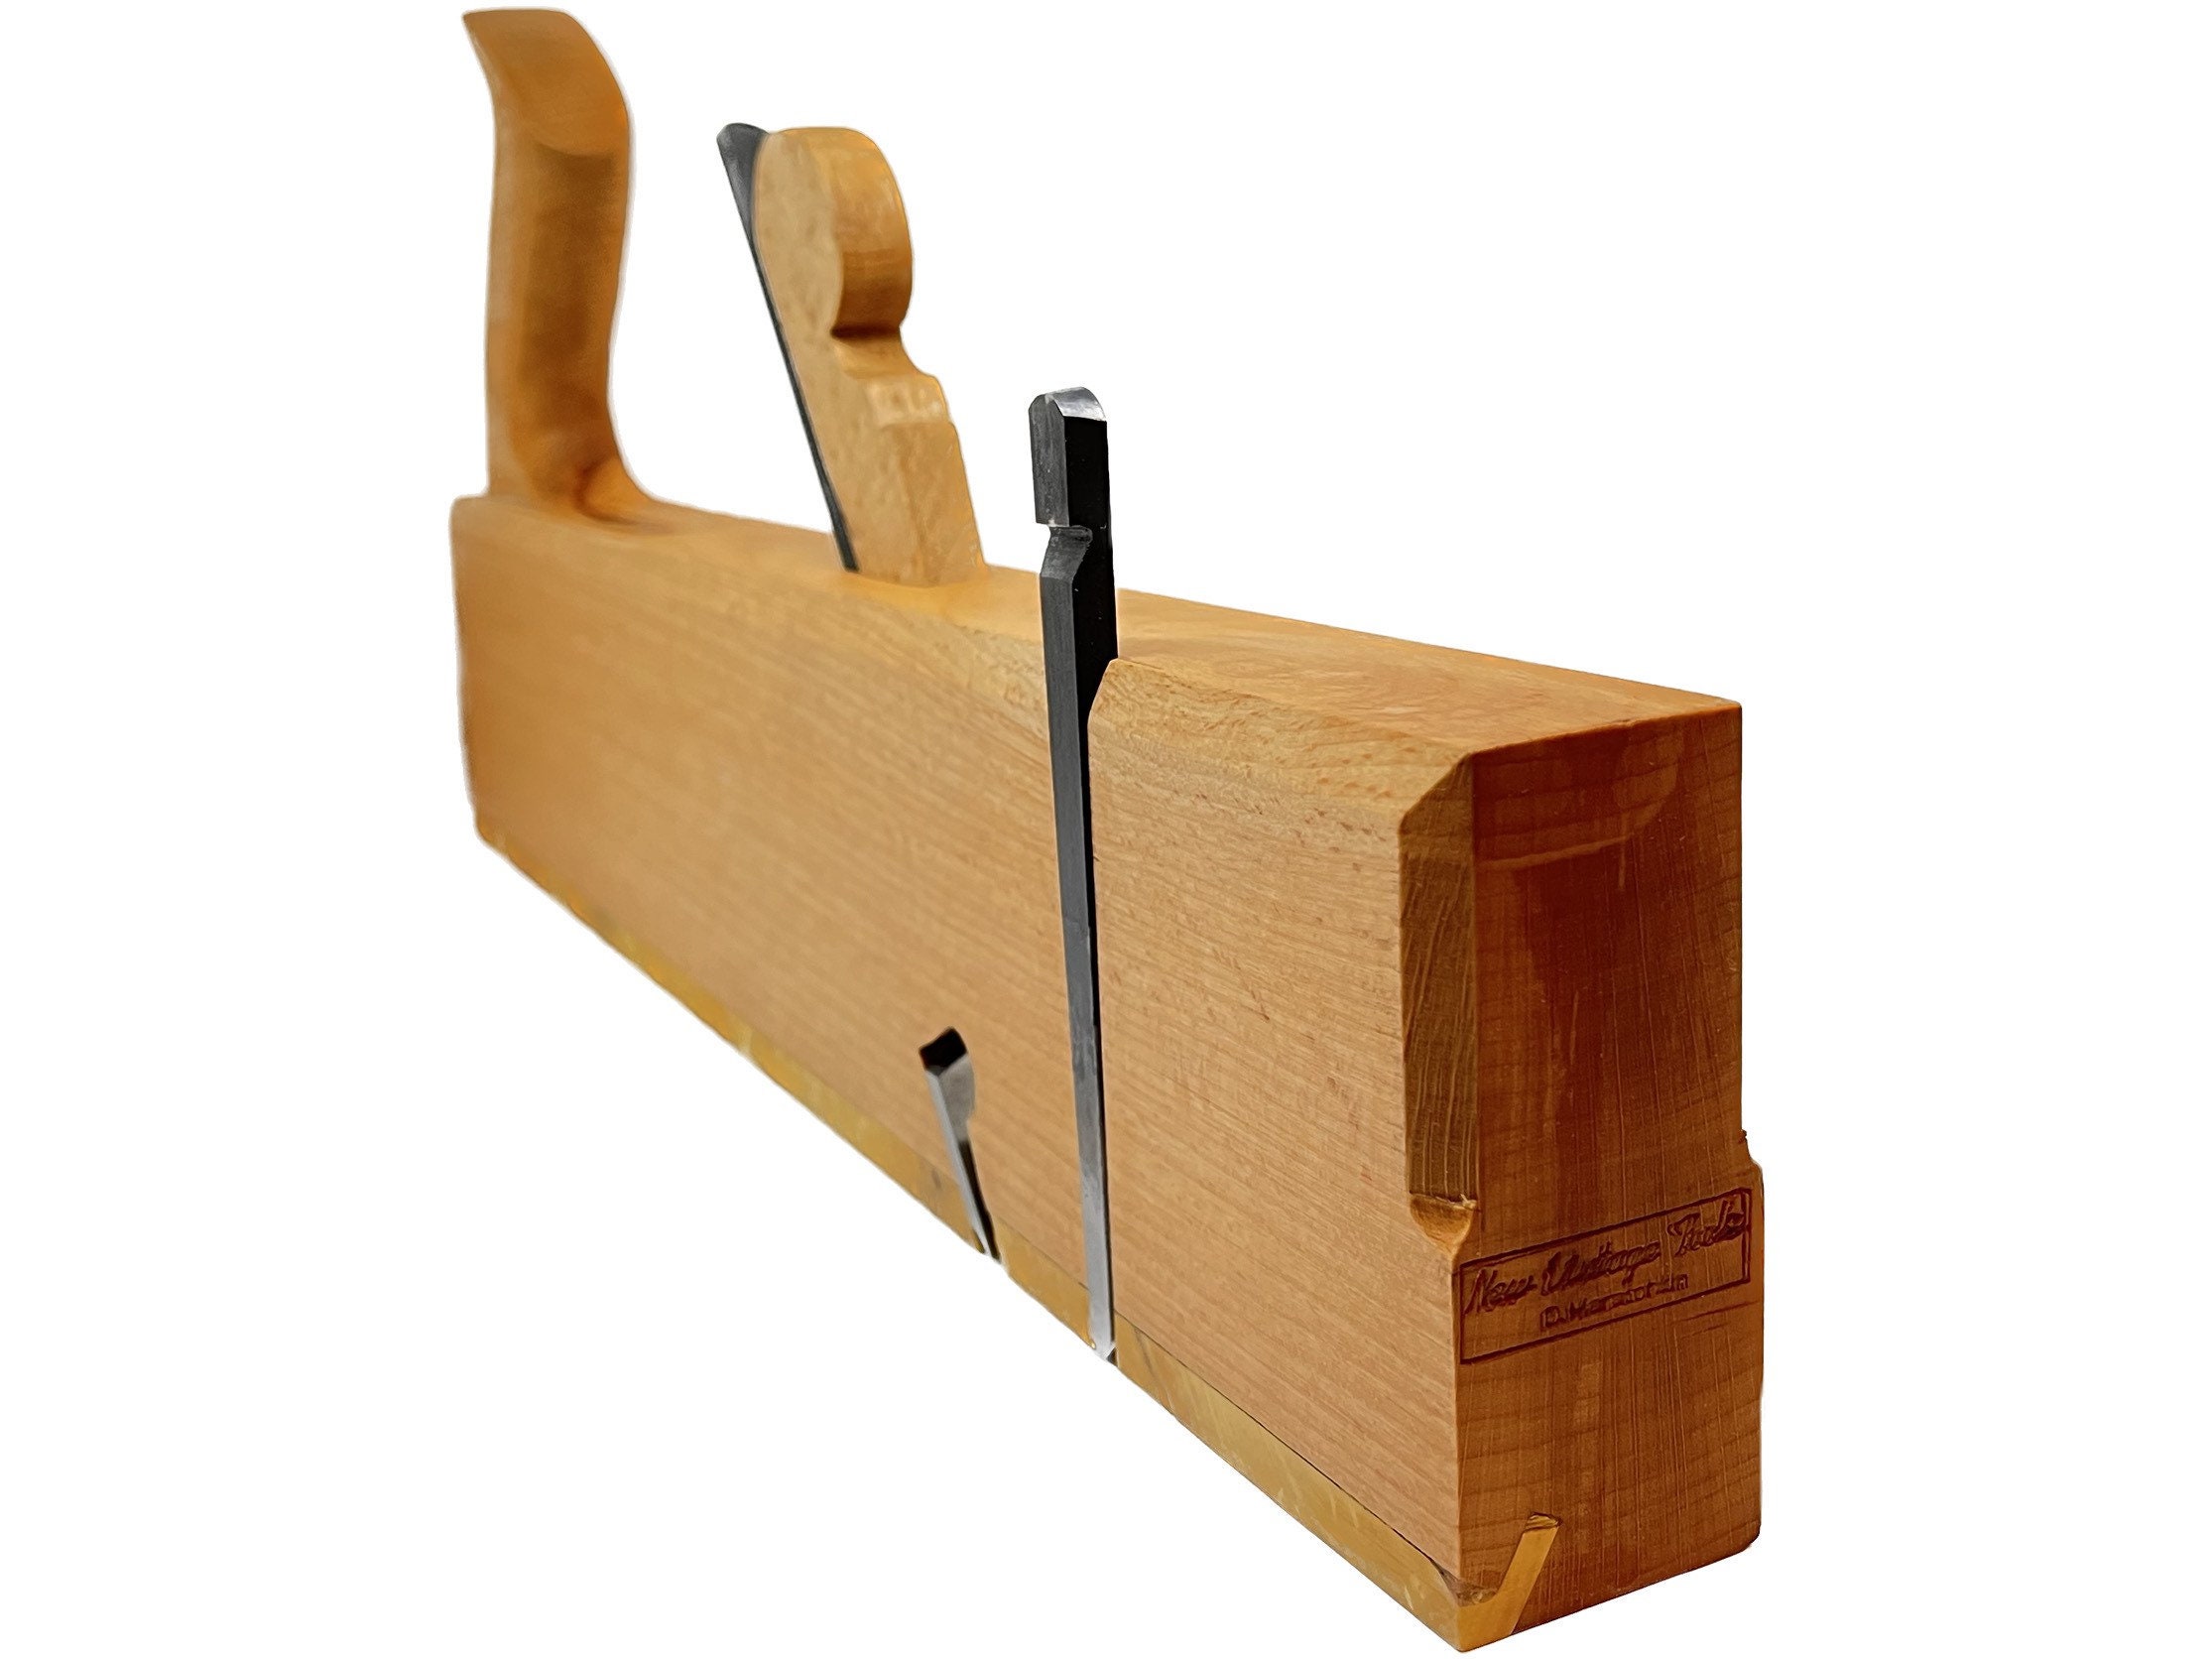 Wooden Hand Plane pic